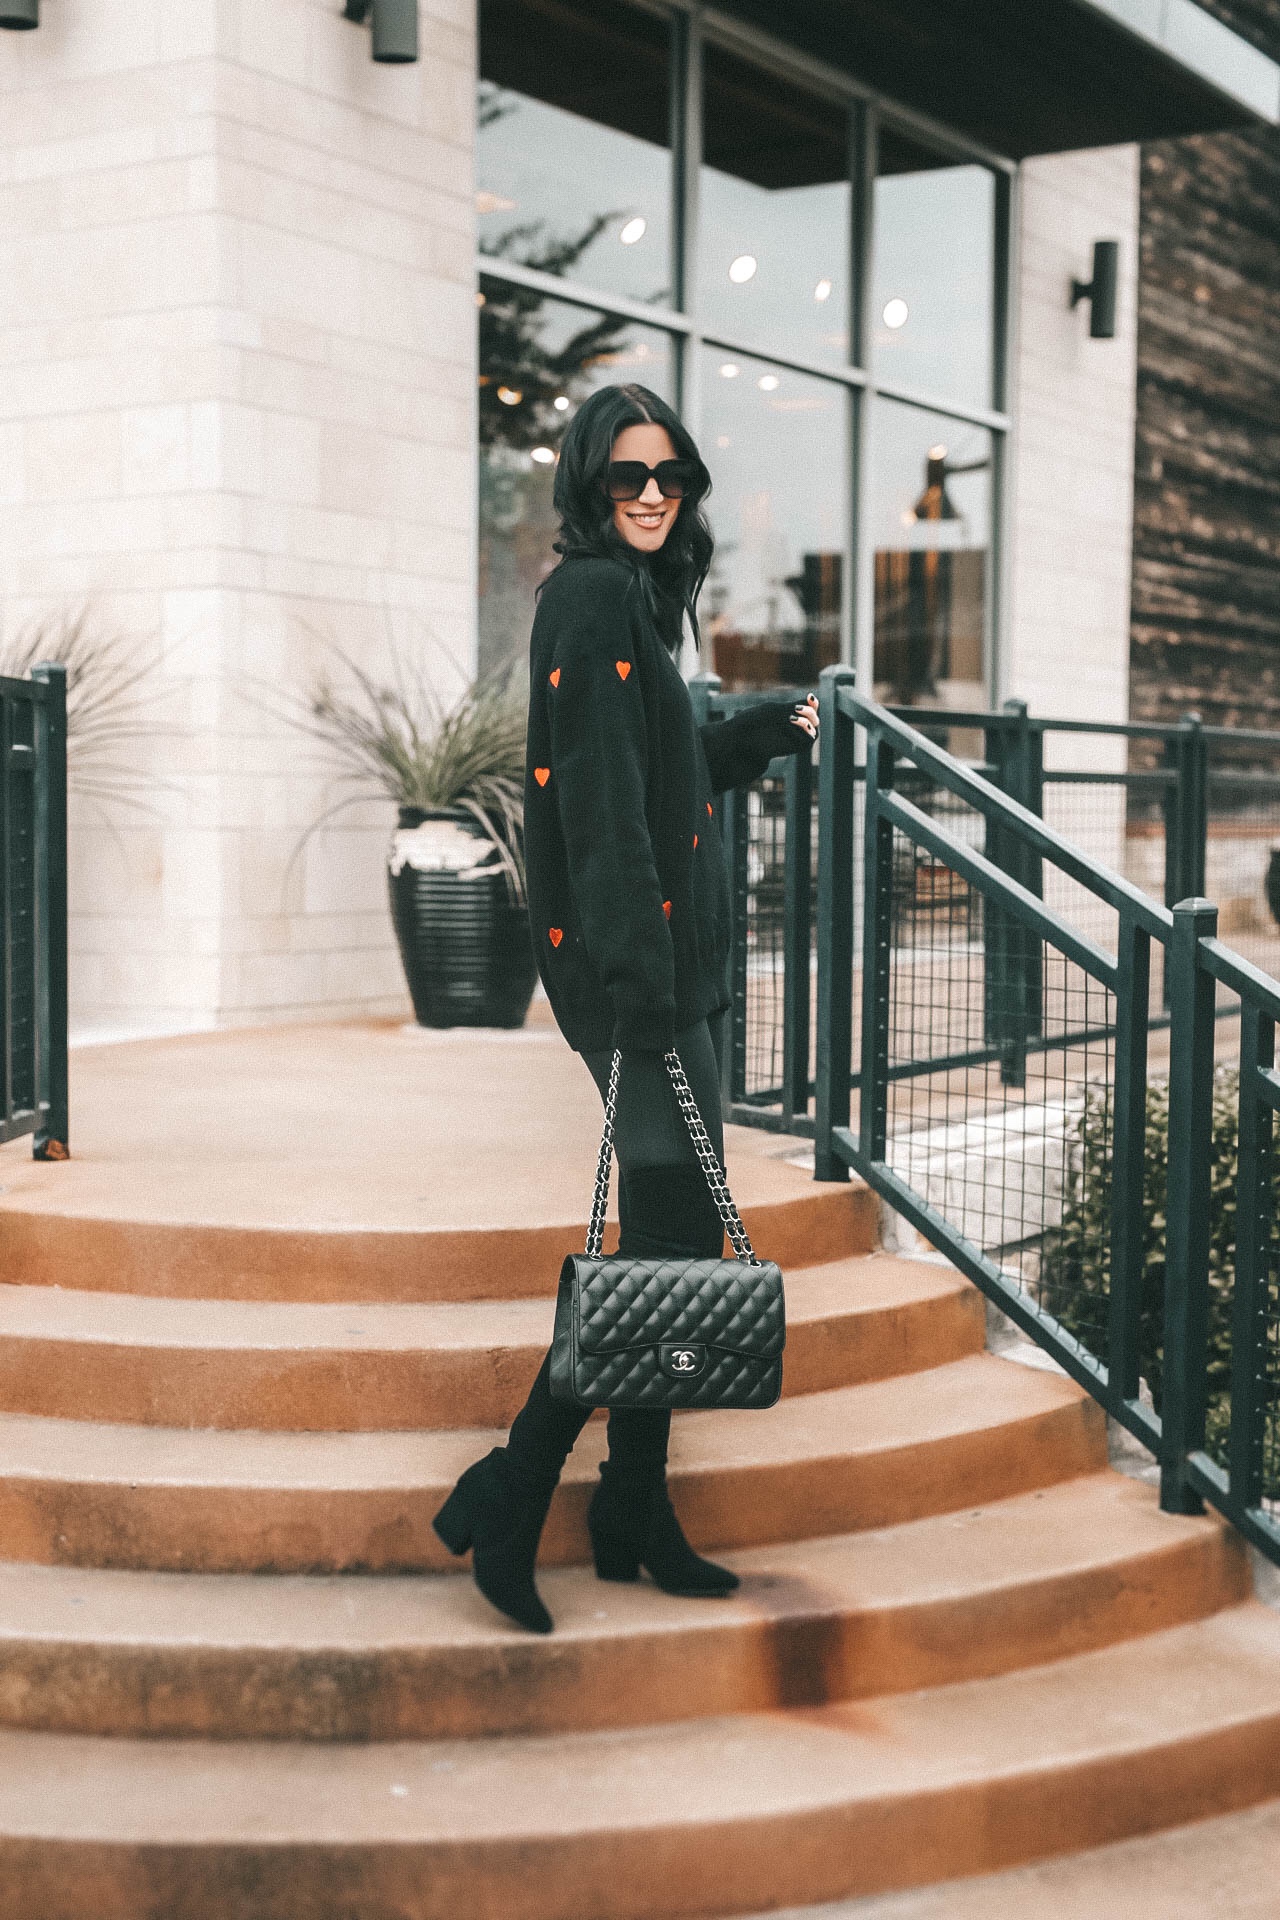 Cute Heart Sweaters by popular Austin fashion blog, Dressed to Kill: Image of a woman wearing a Chicwish sweater, Nordstrom leggings, Goodnight Macaroon boots, YSL sunglasses and Chanel bag.